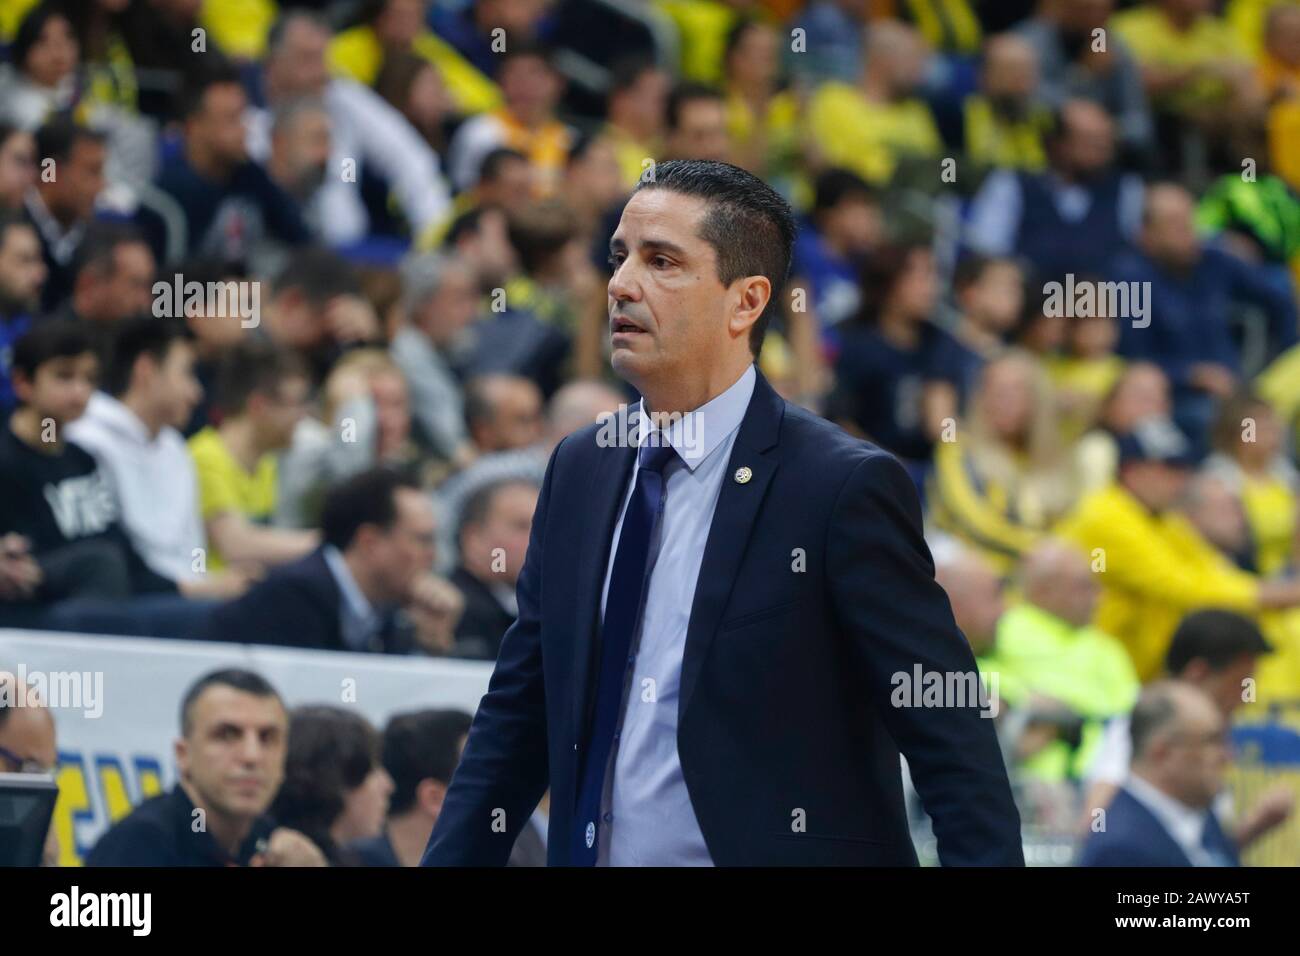 ISTANBUL / TURKEY - FEBRUARY 7, 2020: Coach Ioannis Sfairopoulos during  EuroLeague 2019-20 Round 24 basketball game between Fenerbahce and Maccabi  Tel Aviv at Ulker Sports Arena Stock Photo - Alamy